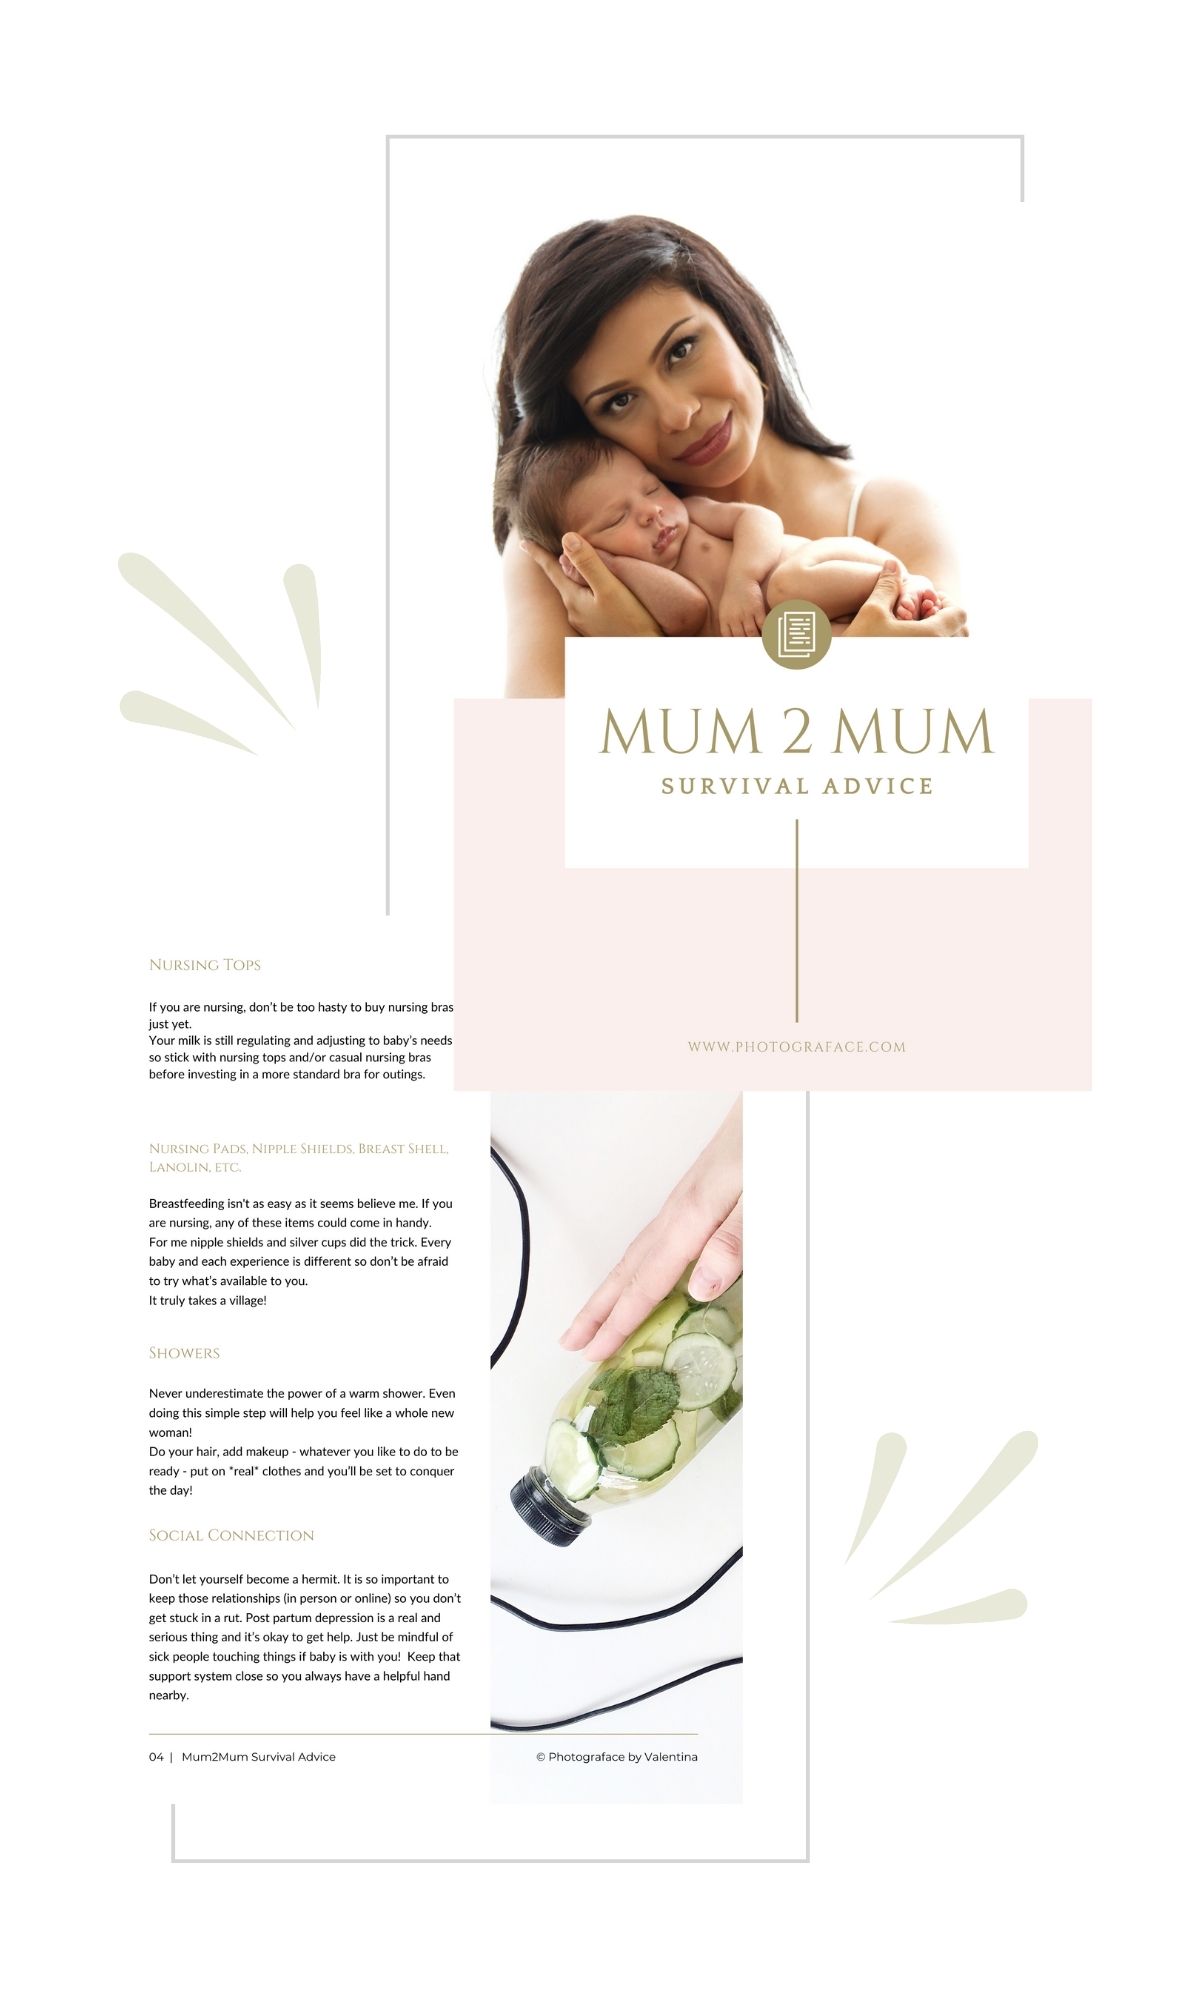 free download: guide for new mums with advices and tips on how to survive the first few weeks with a baby